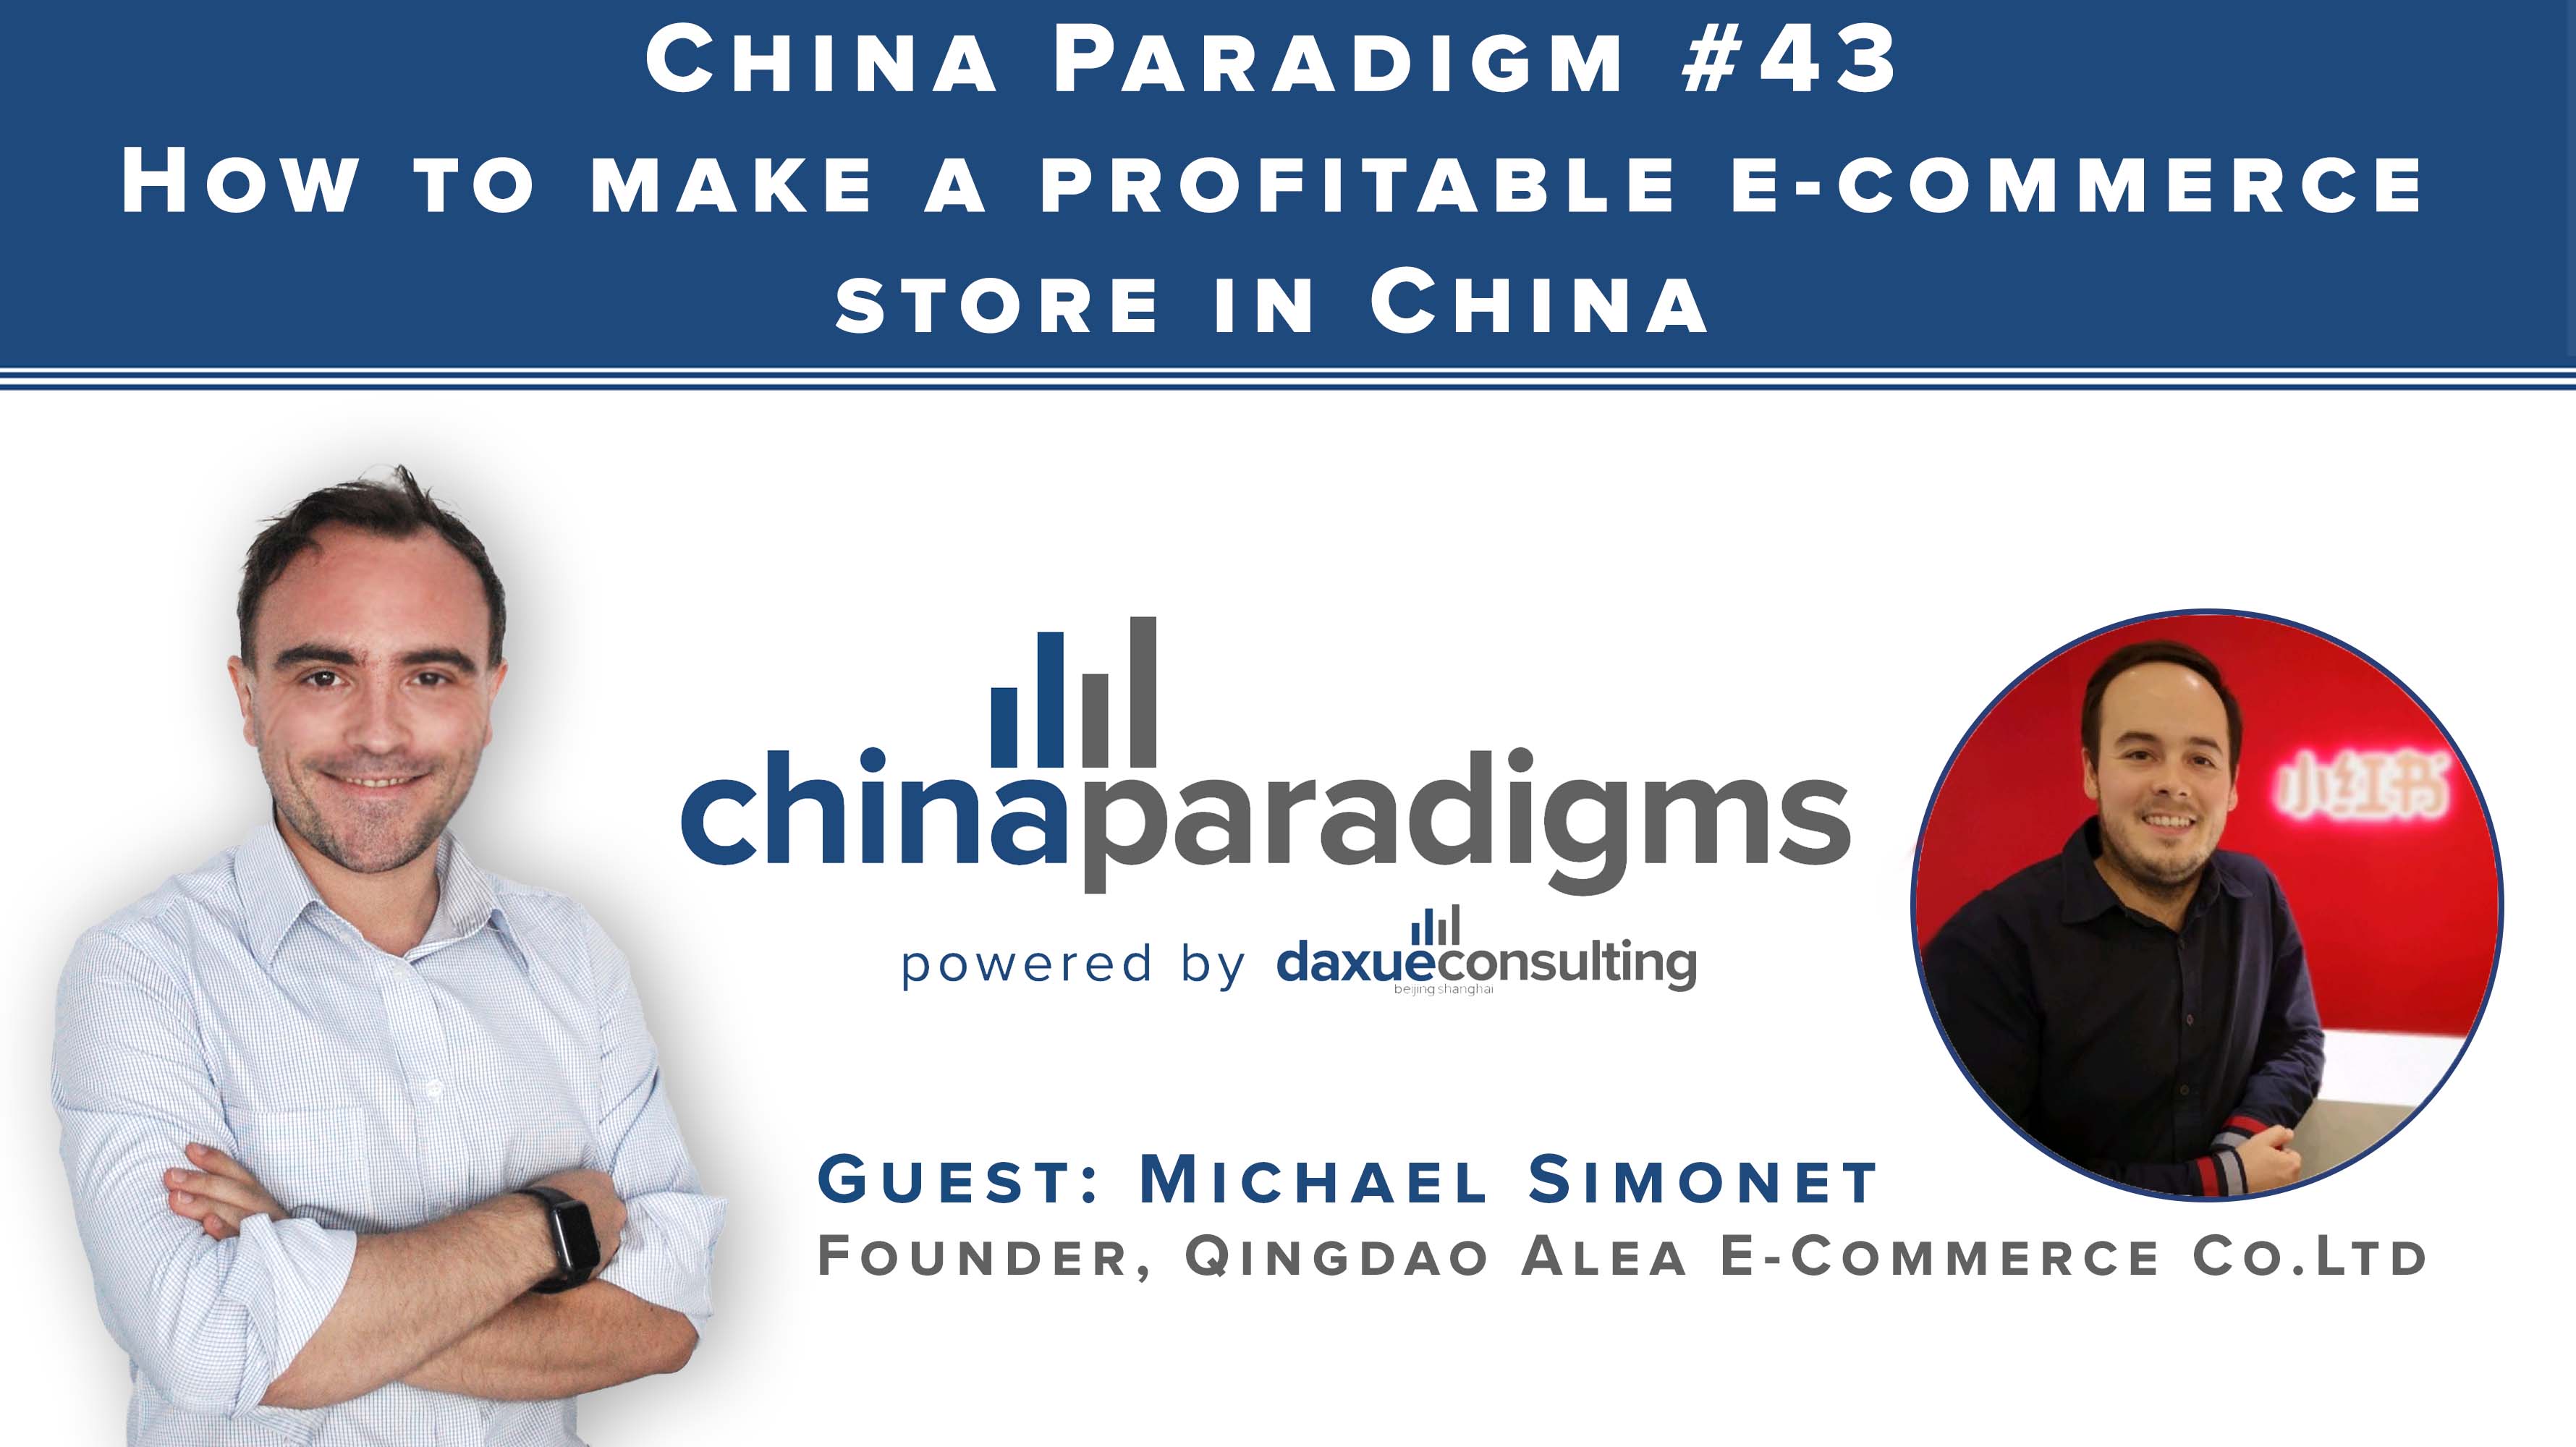 [Podcast] China Paradigm 43: How to make a profitable e-commerce store in China